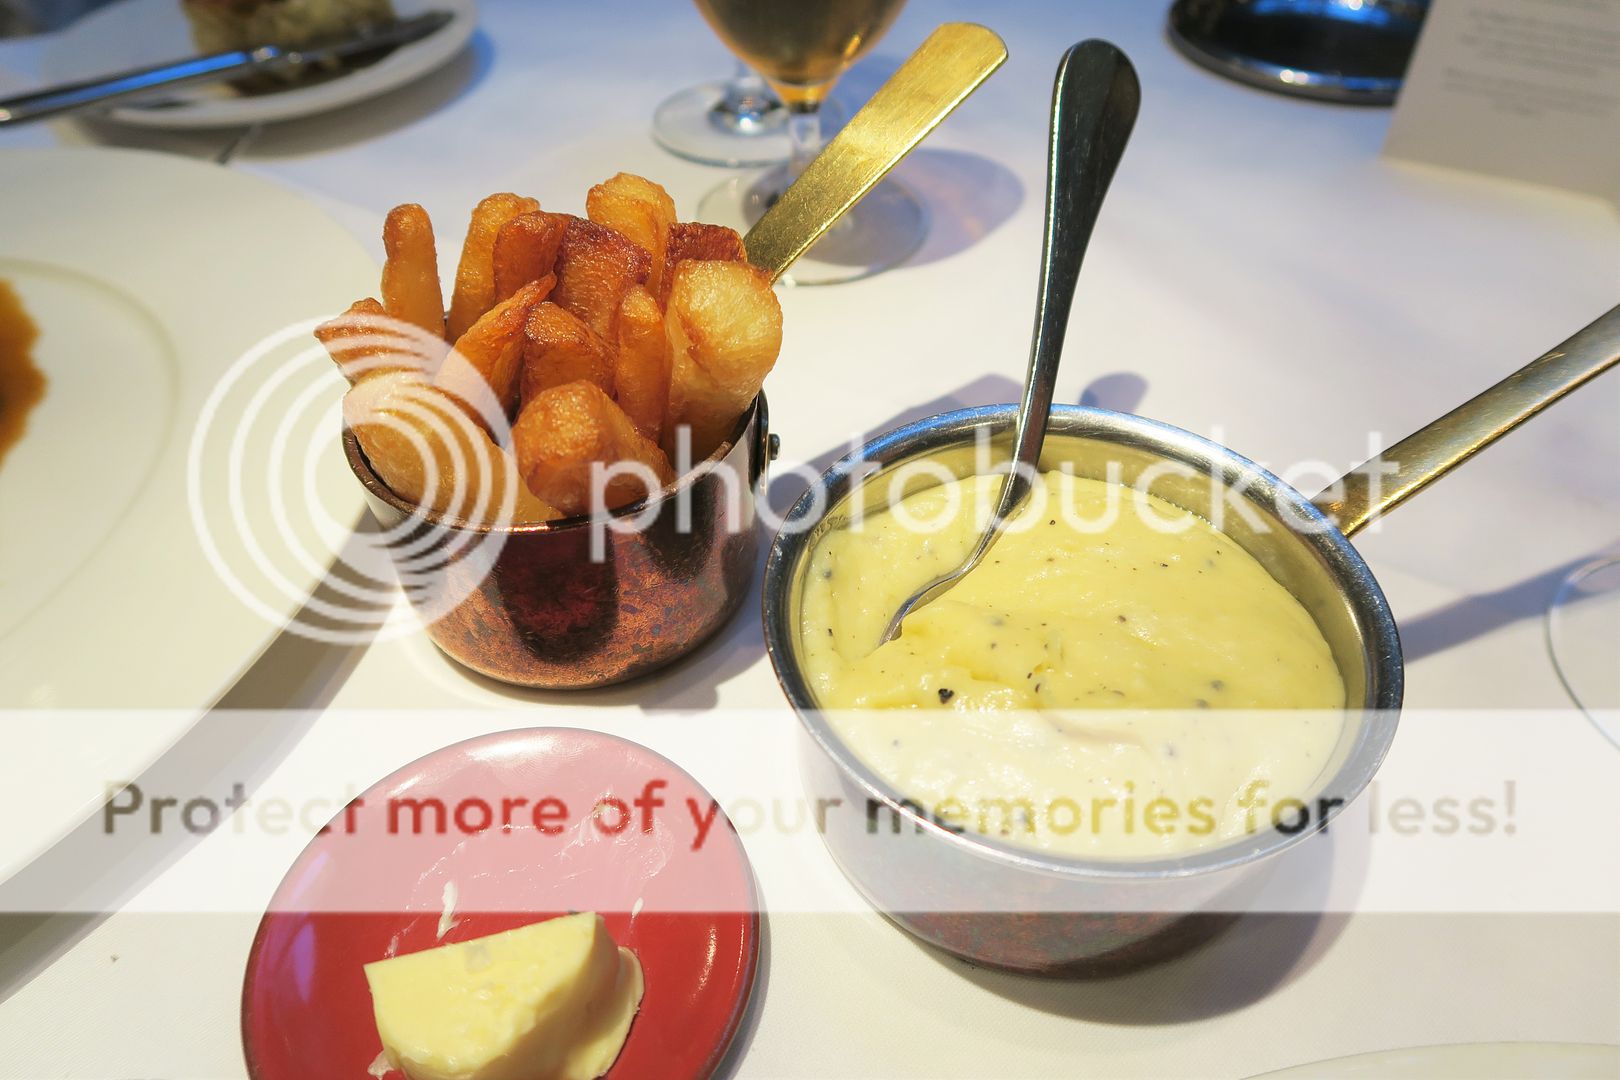 15- Clos Maggiore Sides, Triple Cooked Chips, Truffle Mashed Potato